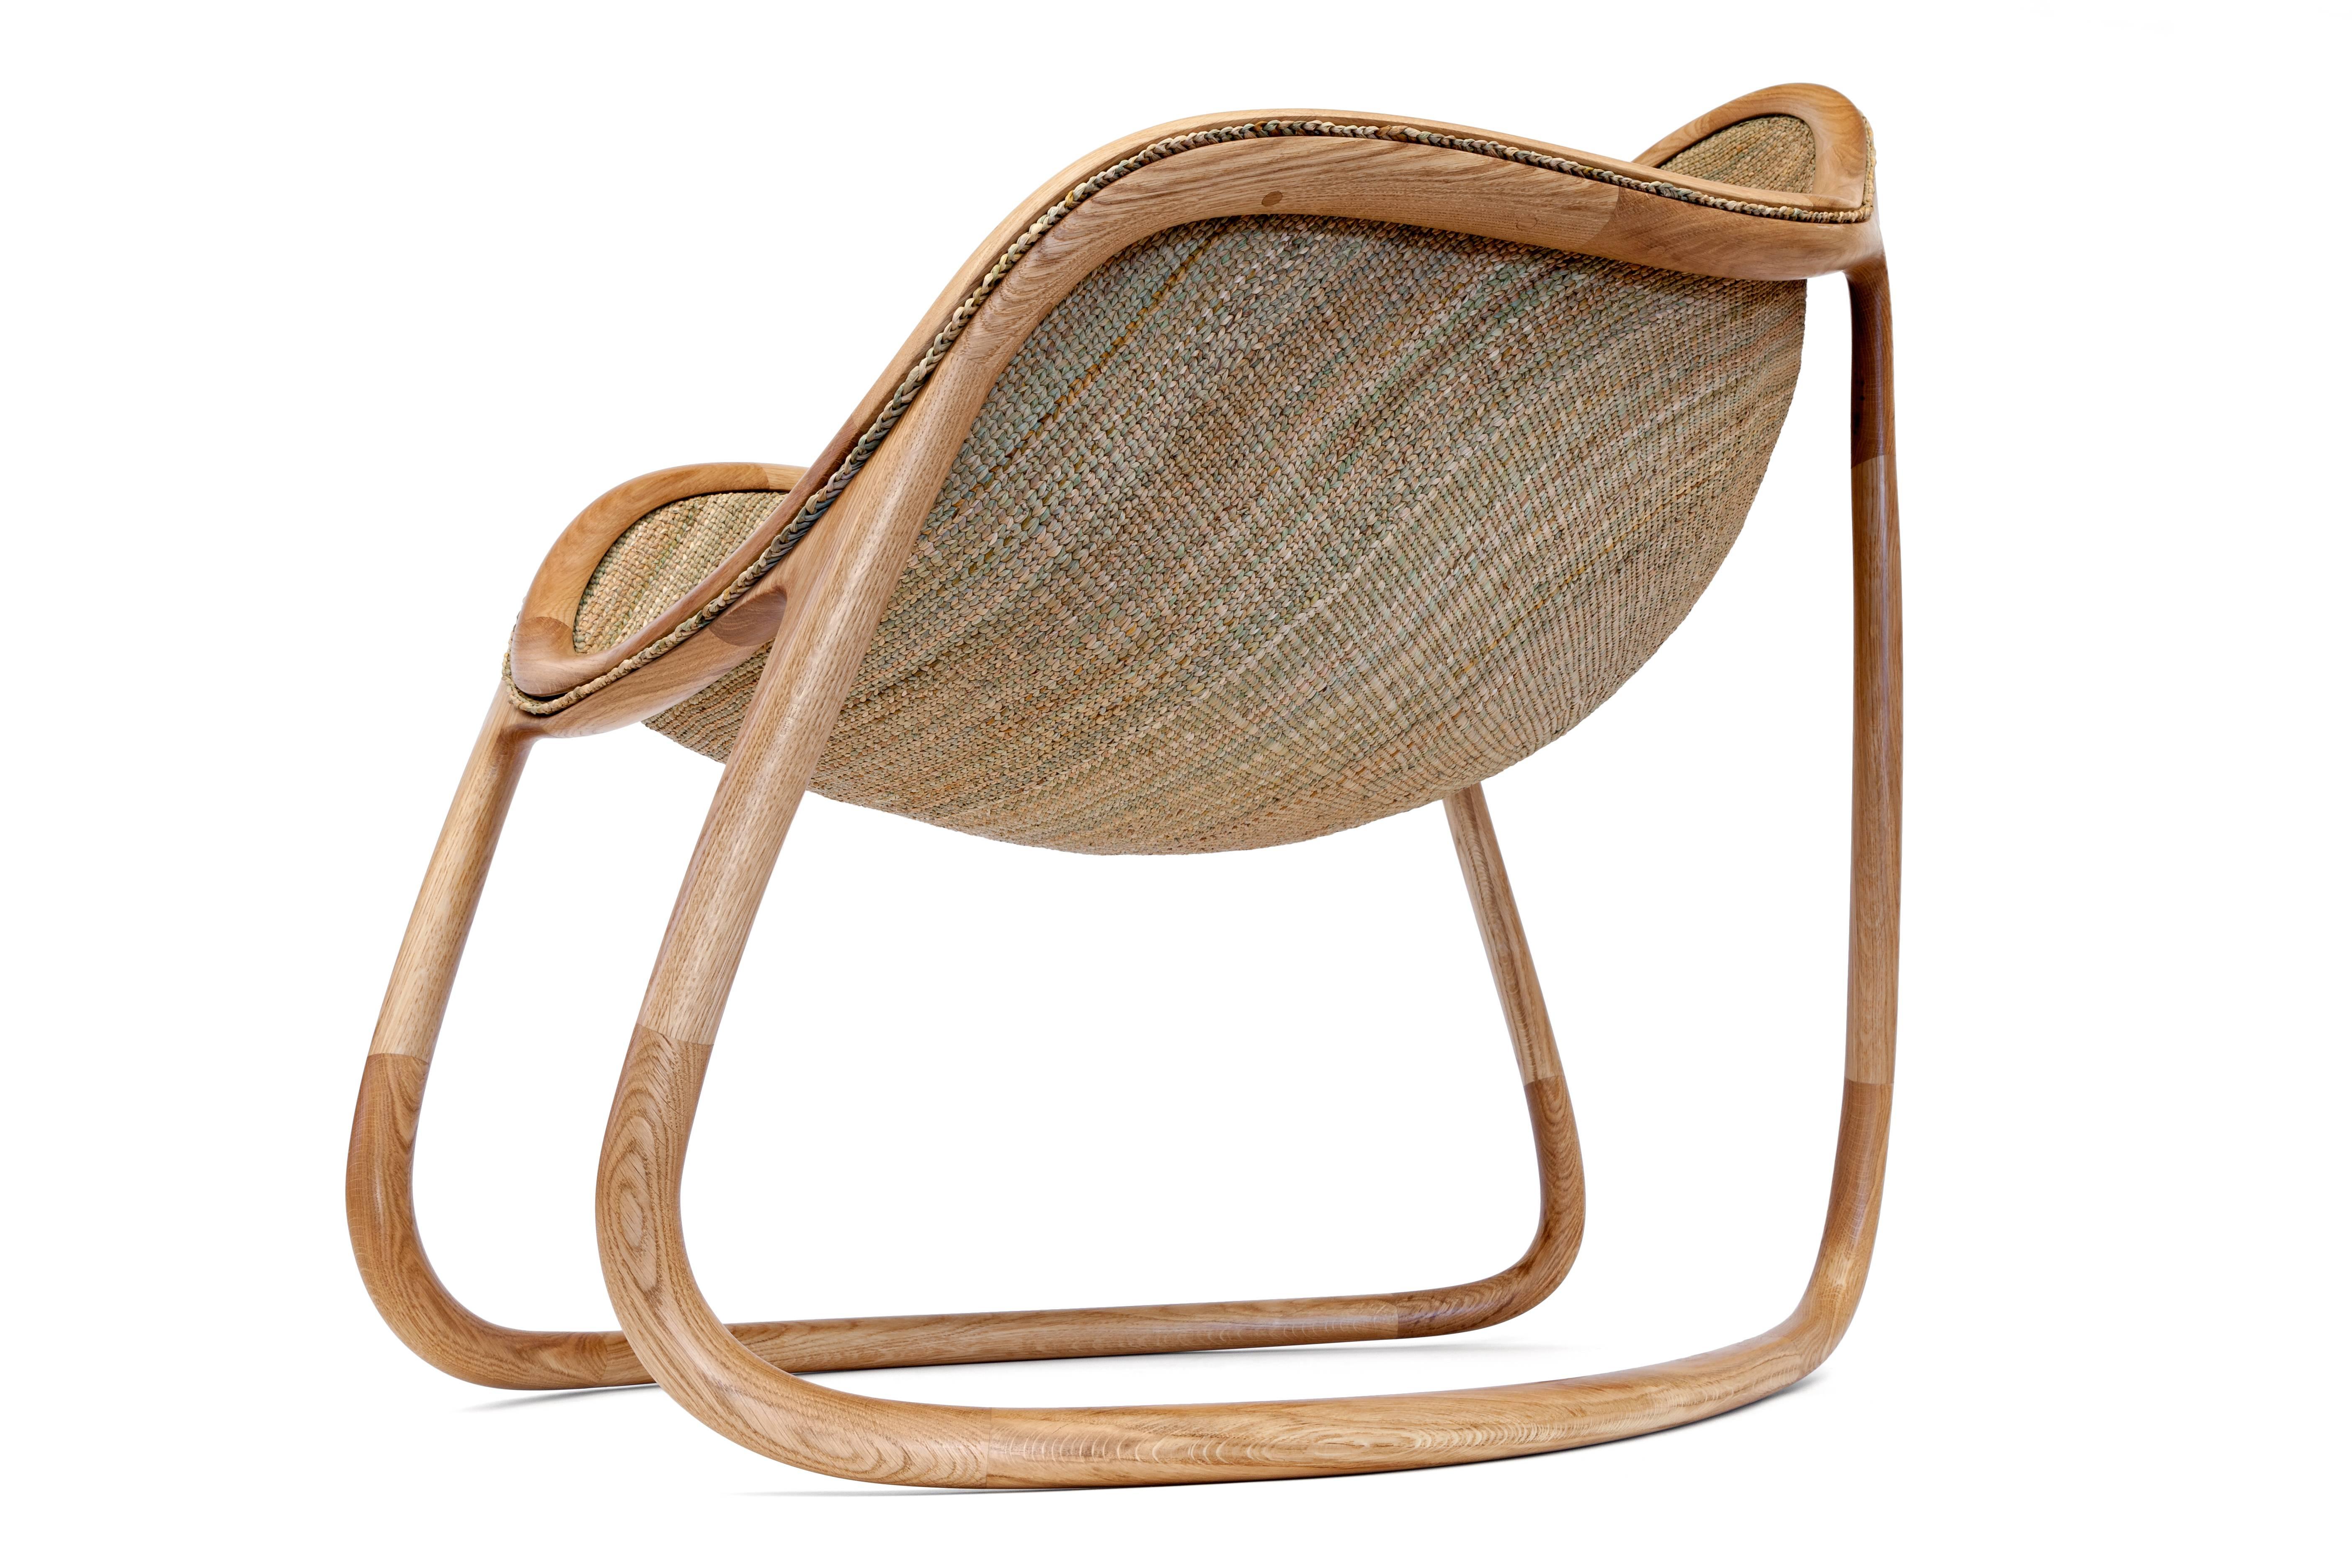 Hand-Crafted Rush Chair, Christopher Jenner, 2016